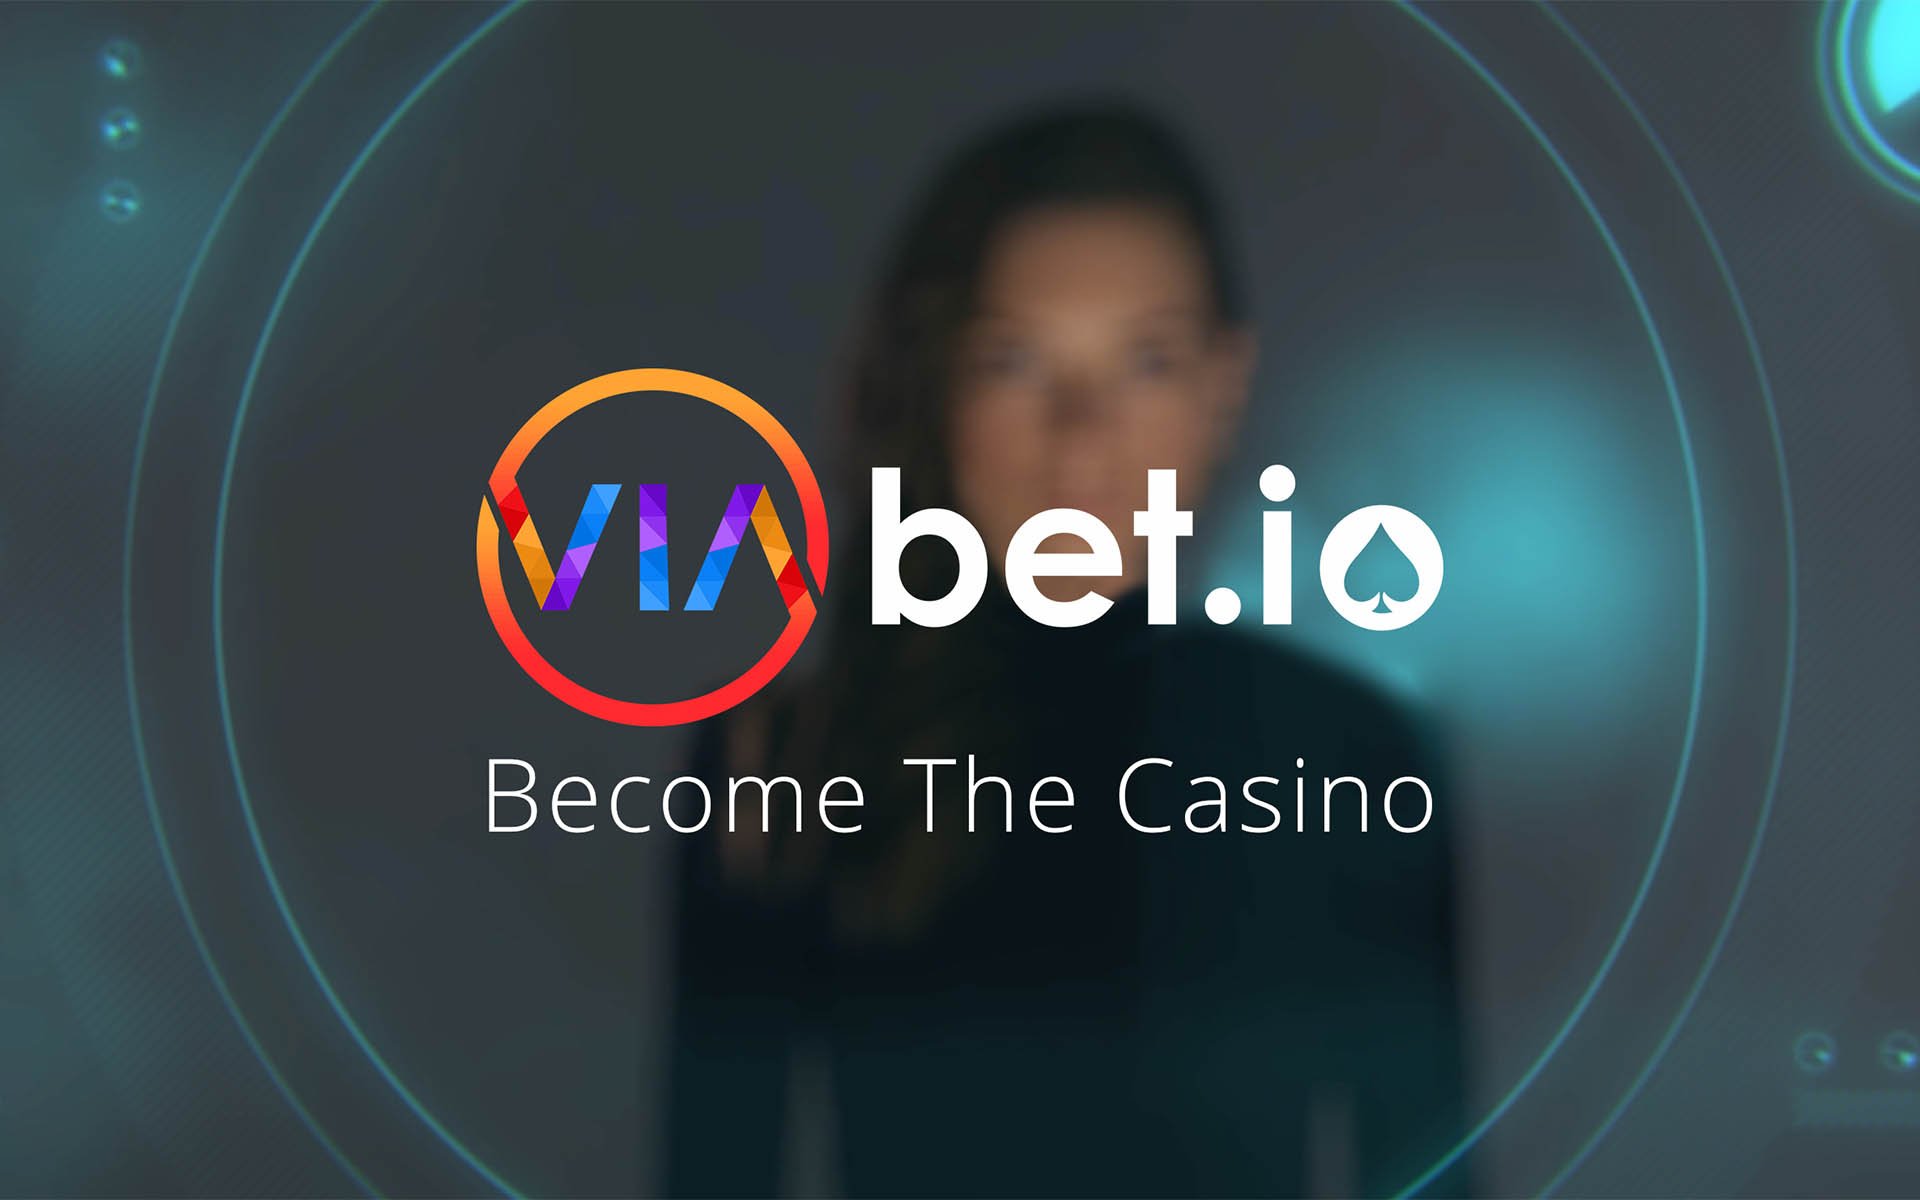 This Blockchain-Powered Platform Aims to Disrupt the Gambling Industry